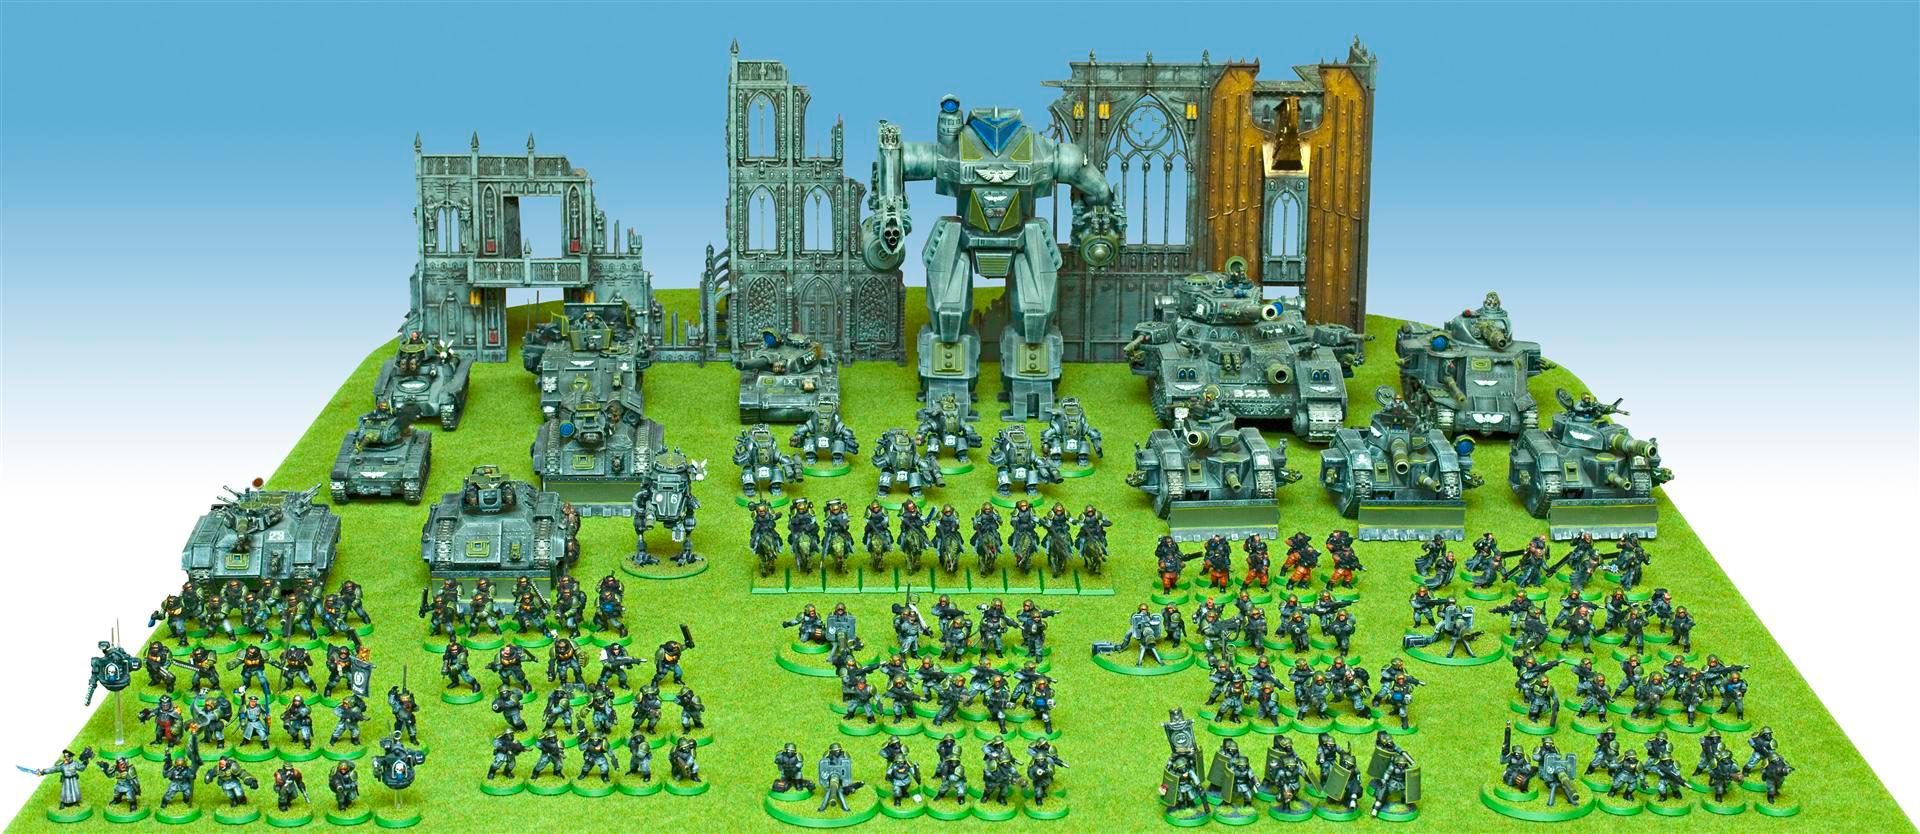 Apocalypse, Army, Astra Militarum, At43, Baneblade, Chimera, Chimeras, Conversion, Count As, Gaming Mat, Green, Grey, Guard, Hellhound, Imperial, Imperial Guard, Imperial Guard Apocalypse Army, Imperial Guard Army, Imperials, Leman Russ Squadron, Malcador, Penal Legion Squad, Psyker Battle Squad, Rough Riders, Sentinel, Veteran, Veteran Squads, Warhound